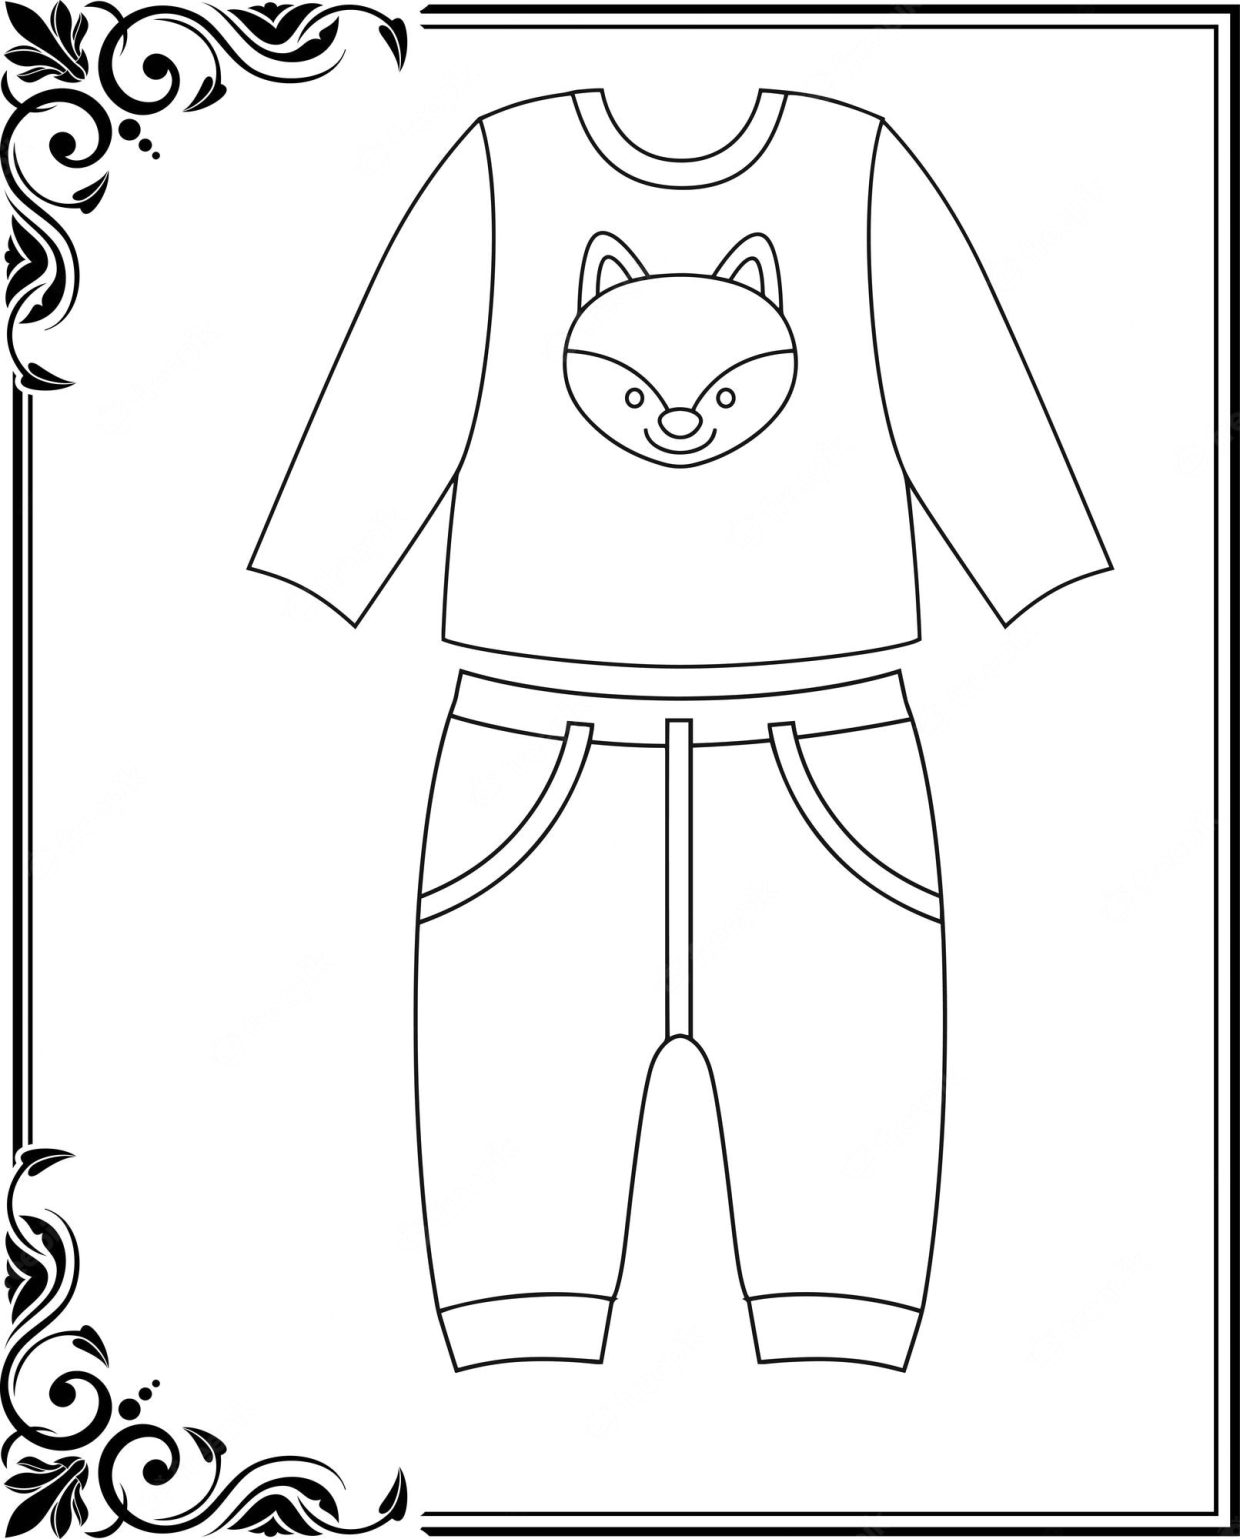 Clothes Coloring Pages: Free, Printable, and Easy Coloring Sheets